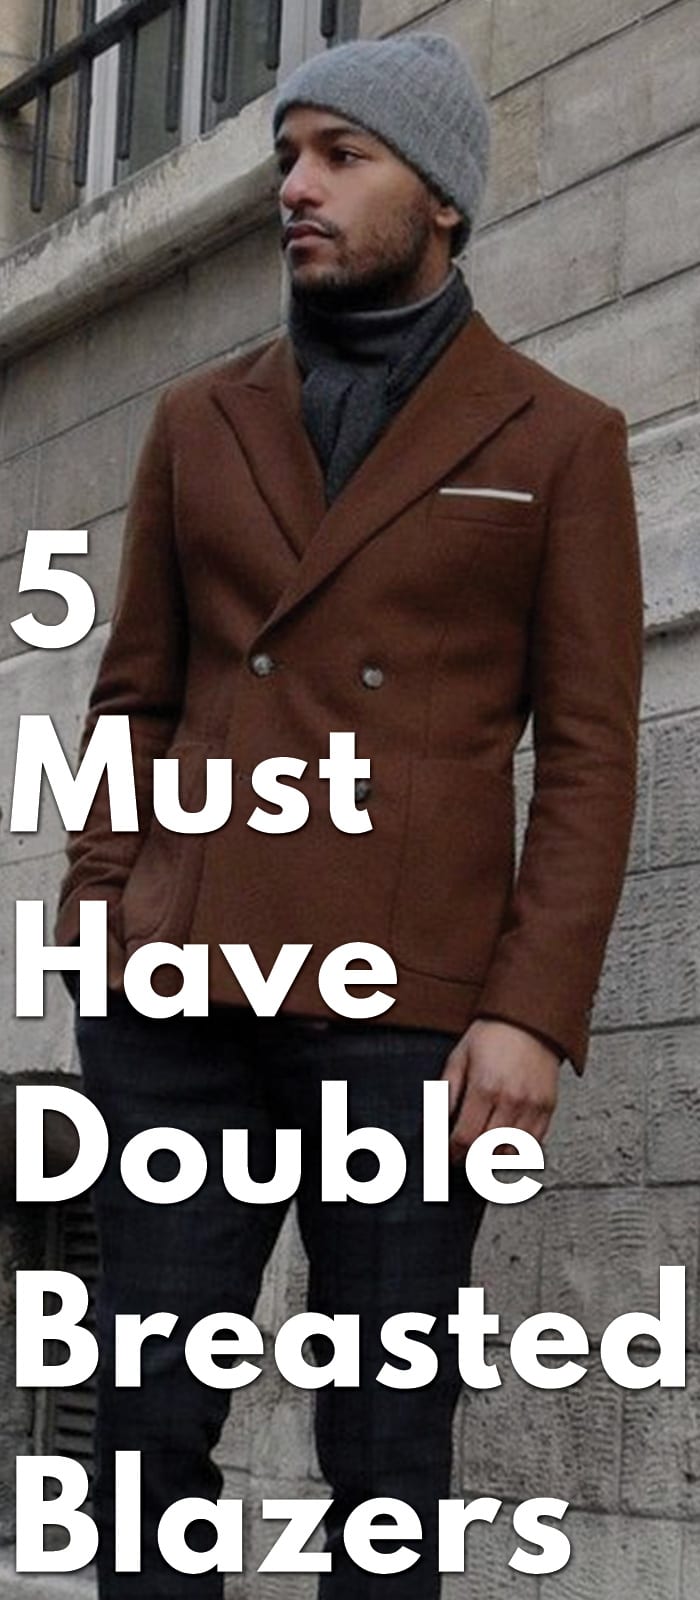 5-Must-Have-Double-Breasted-Blazers